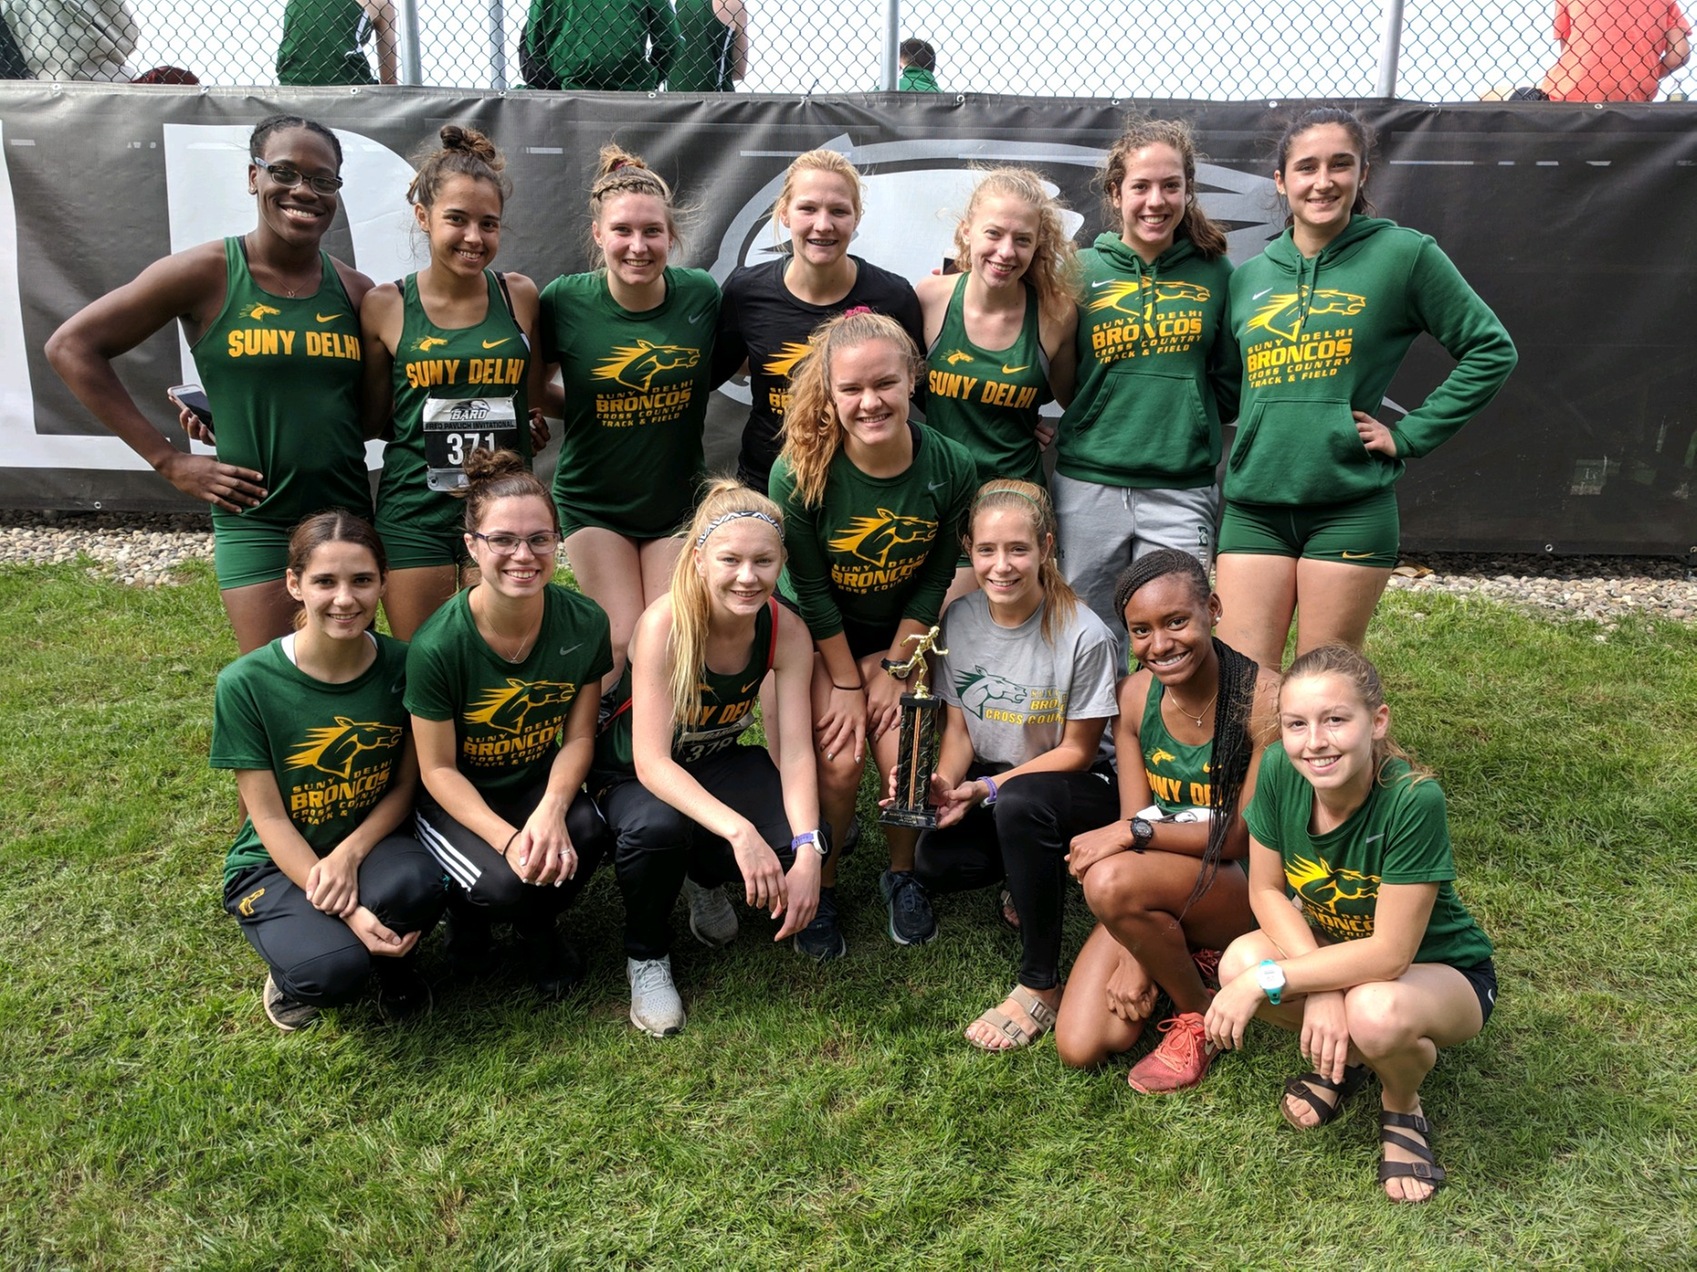 Women place third at Fred Pavlich Invitational